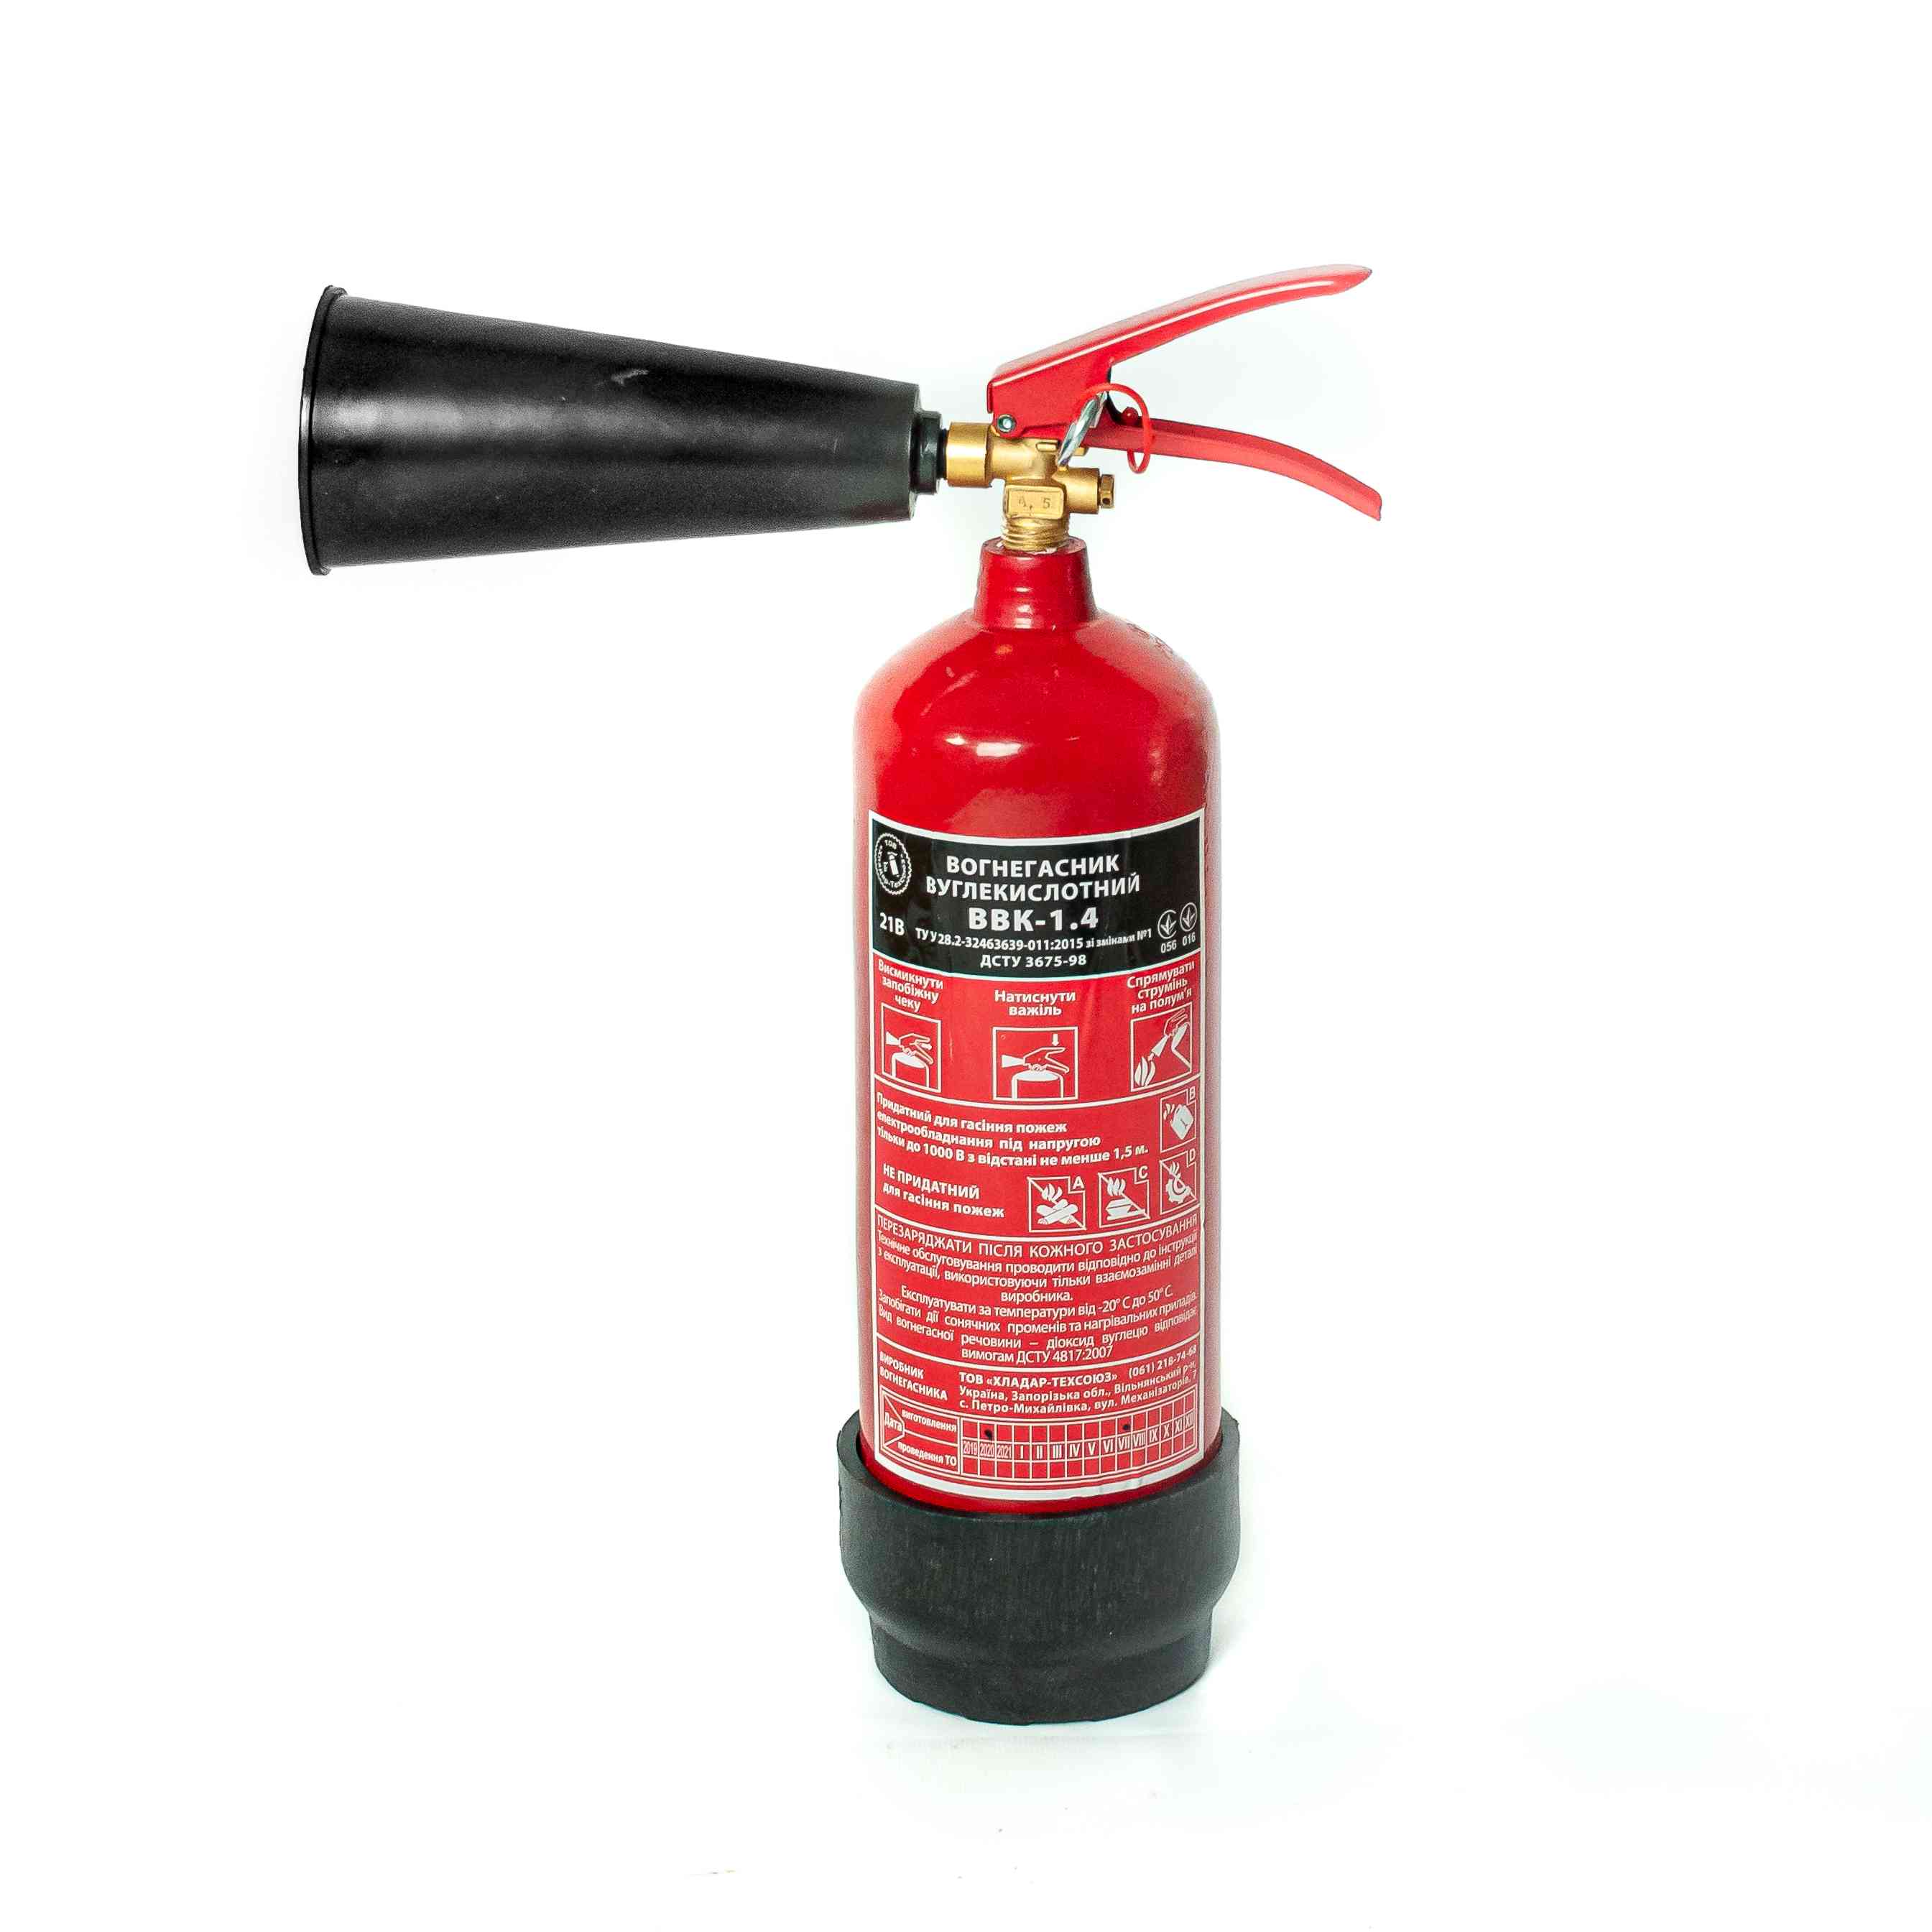 CO2 Fire Extinguisher-1.4  - 2